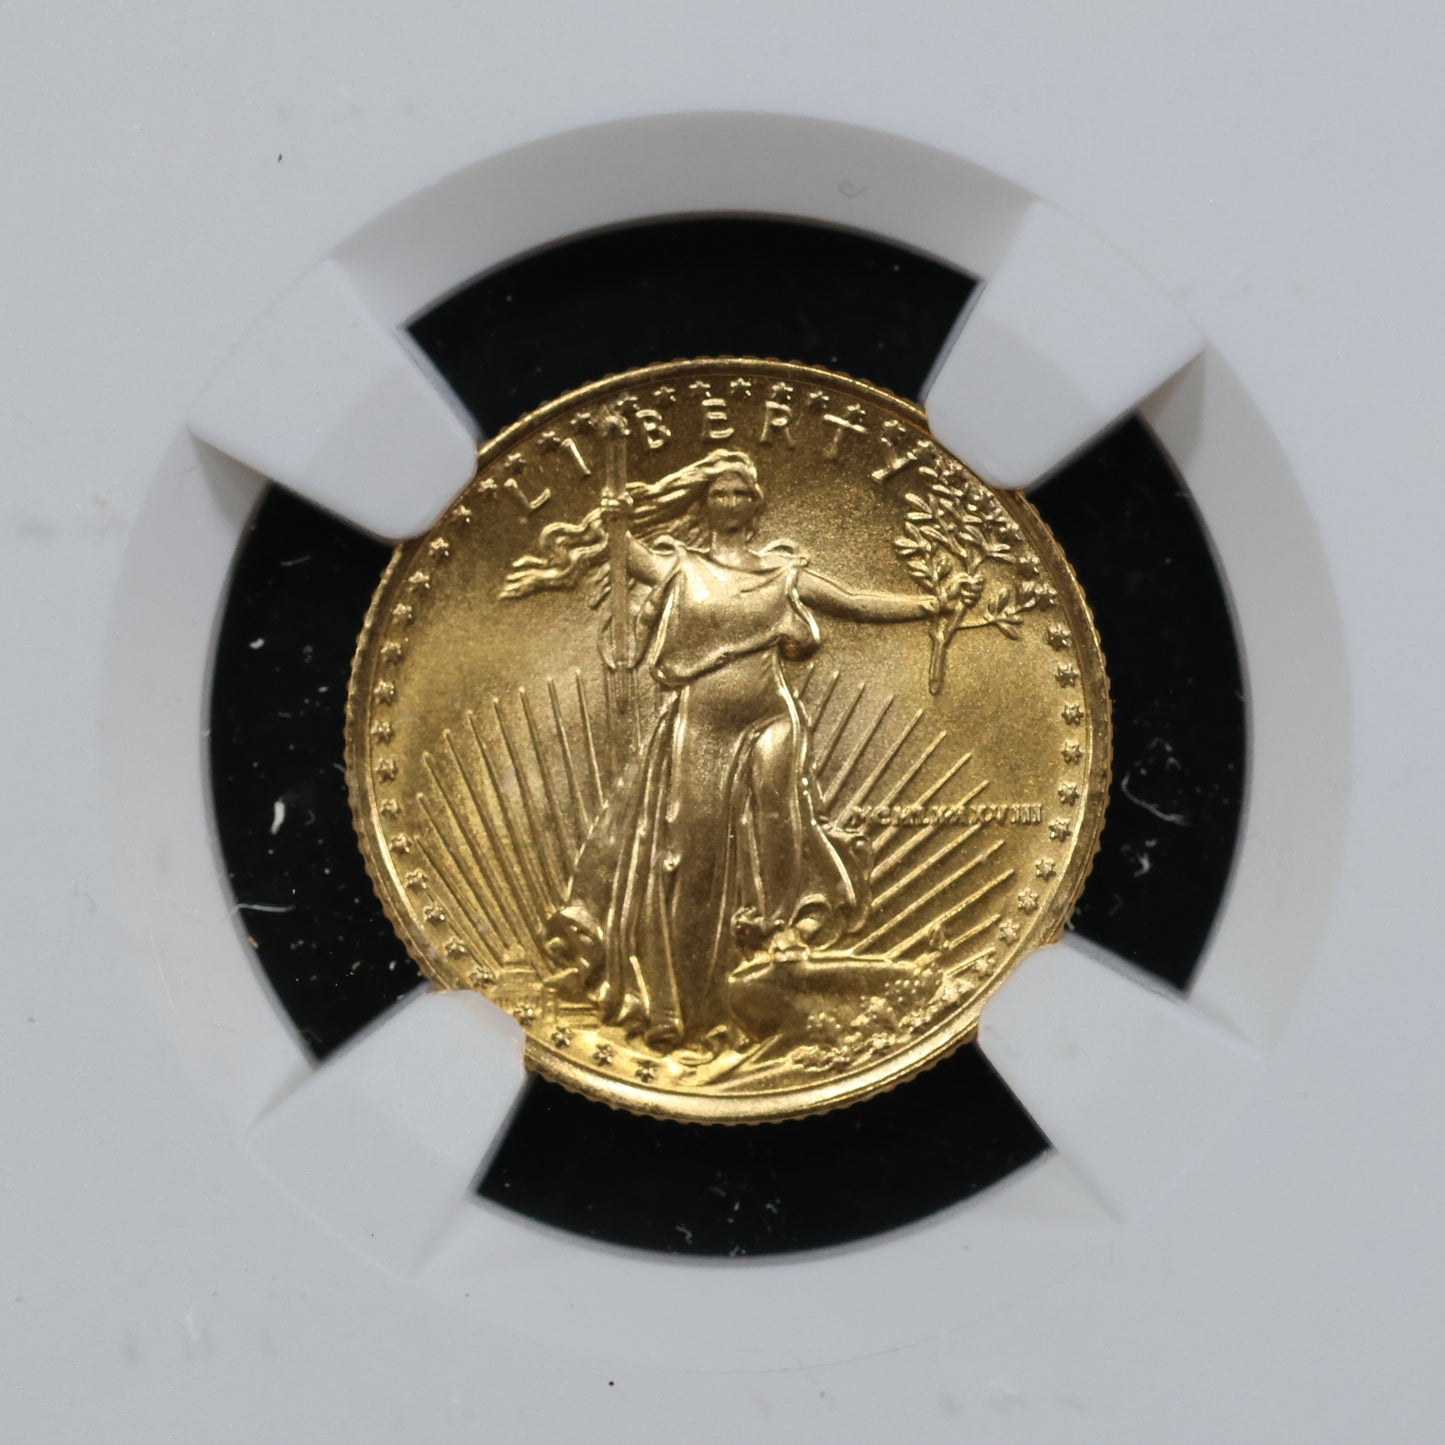 1988 1/10 oz Gold American Eagle 5$ Bullion Gold Coin - NGC MS 69